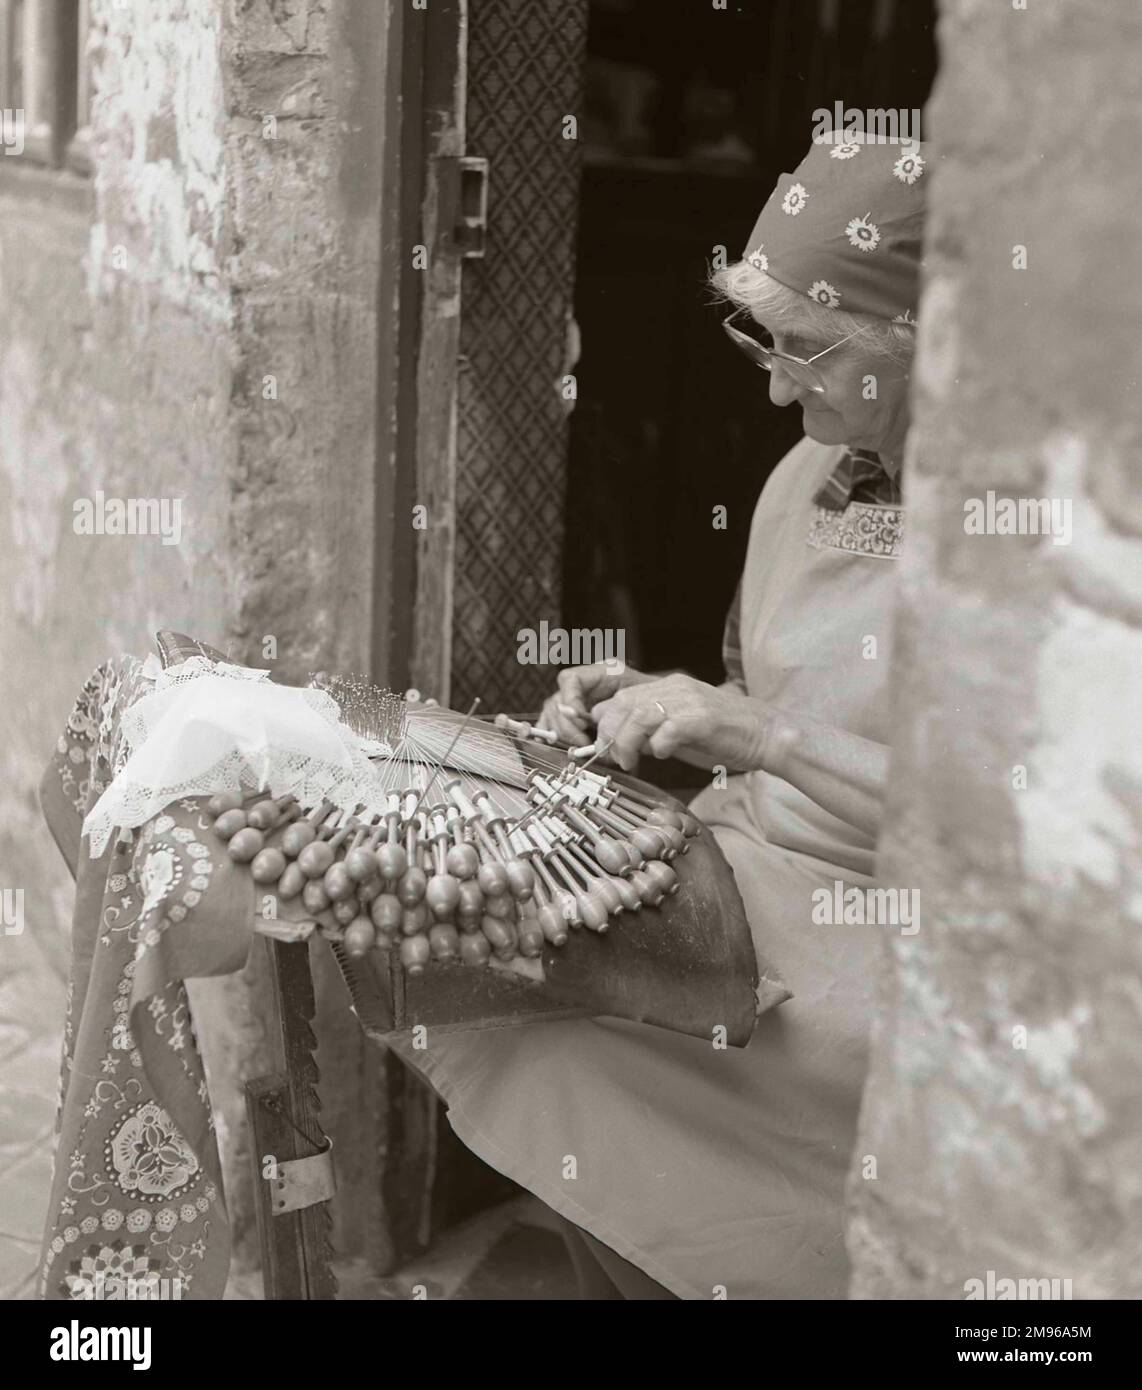 An elderly woman making lace in the open doorway of her home, with a large number of bobbins on display. Stock Photo